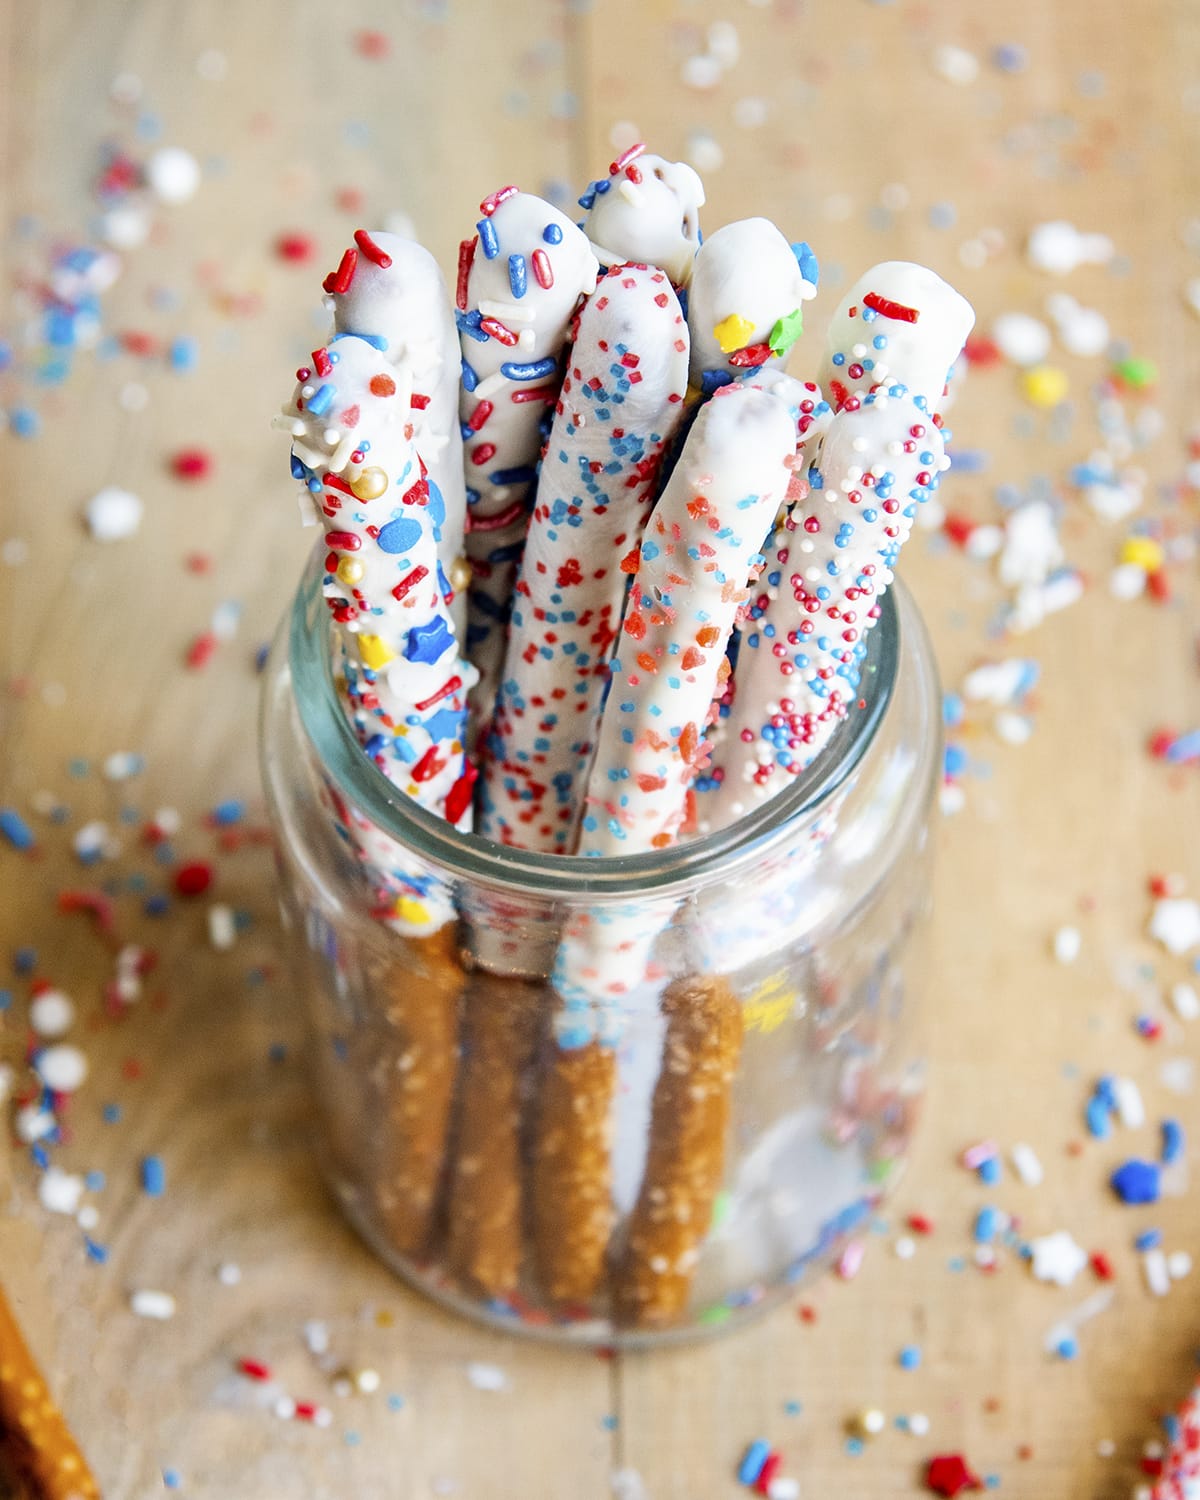 White chocolate dipped pretzel rods in a glass jar.